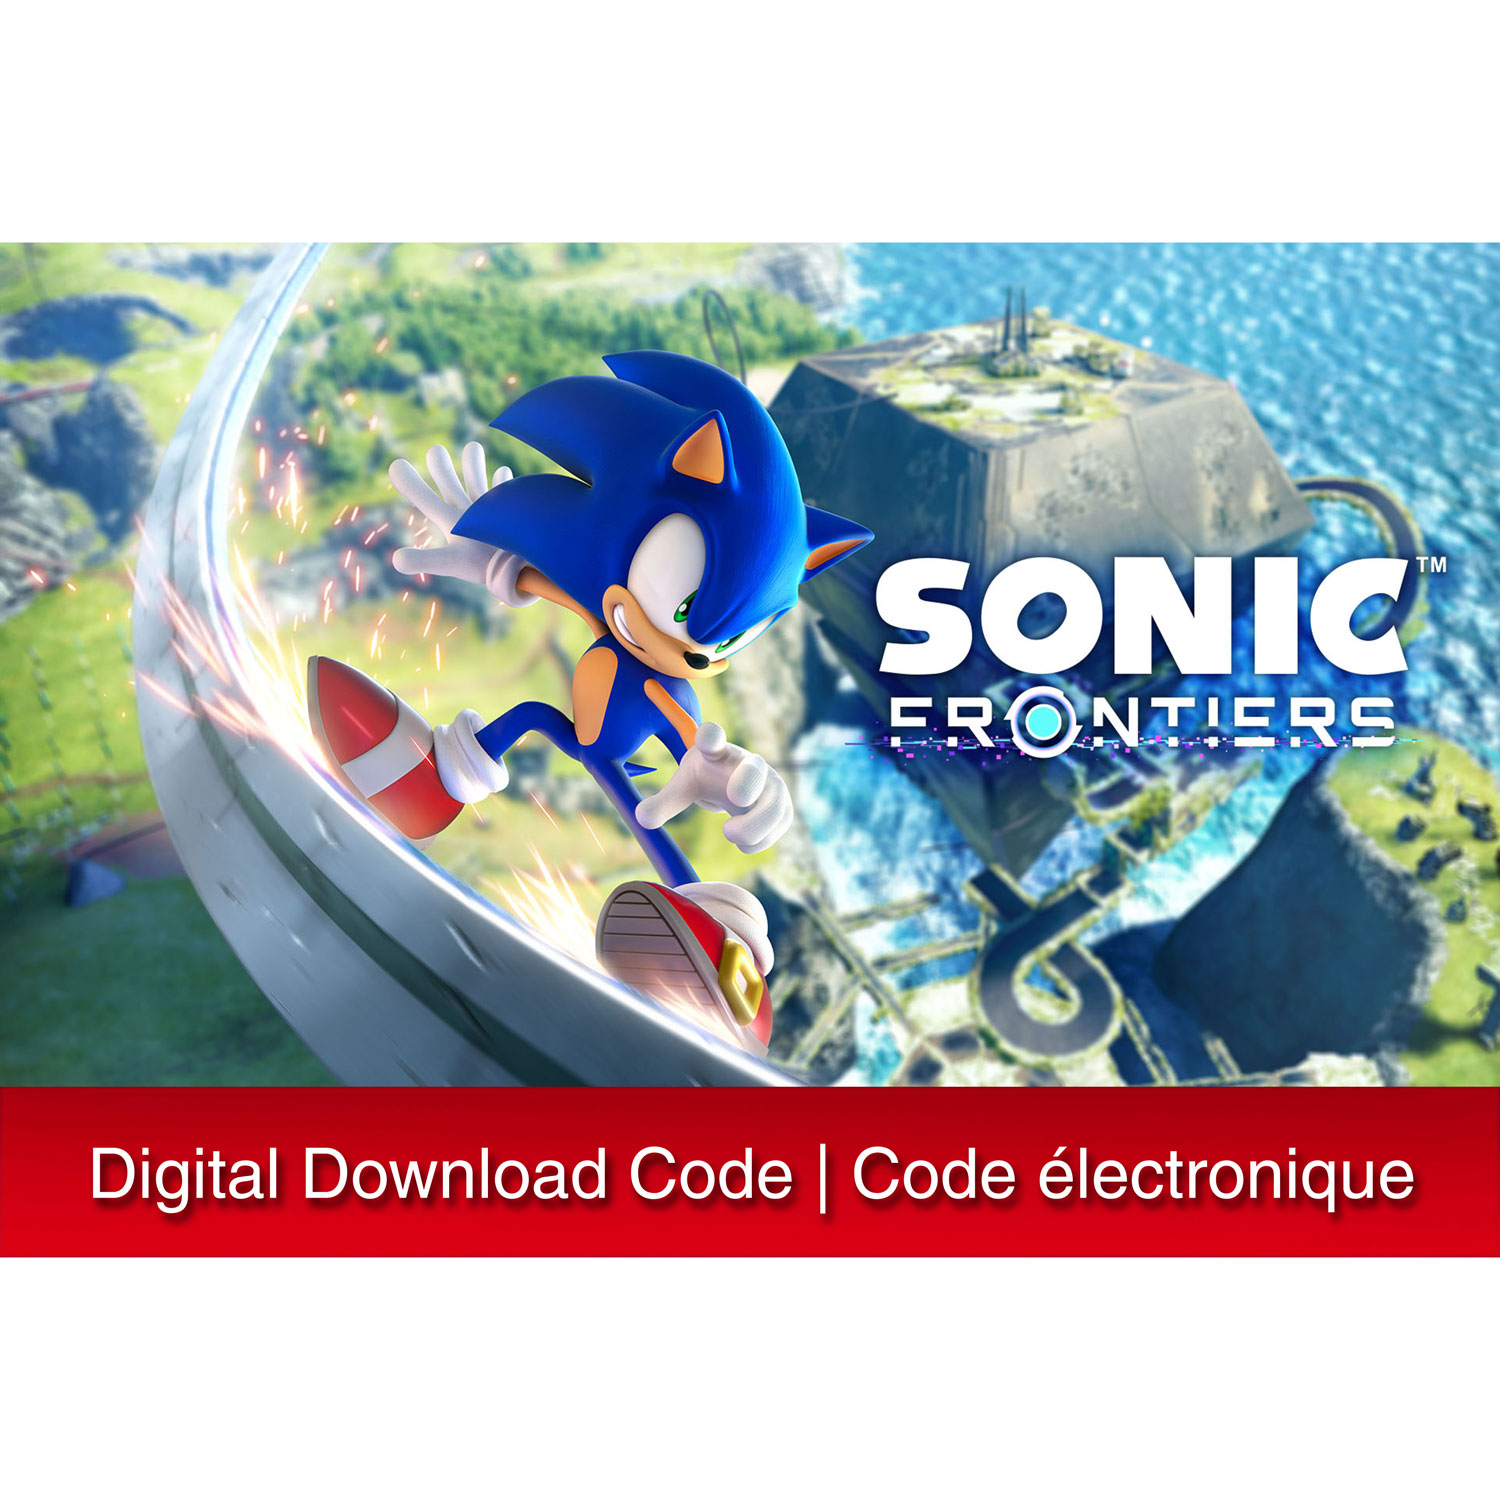 Sonic Frontiers (Switch) - Digital Download